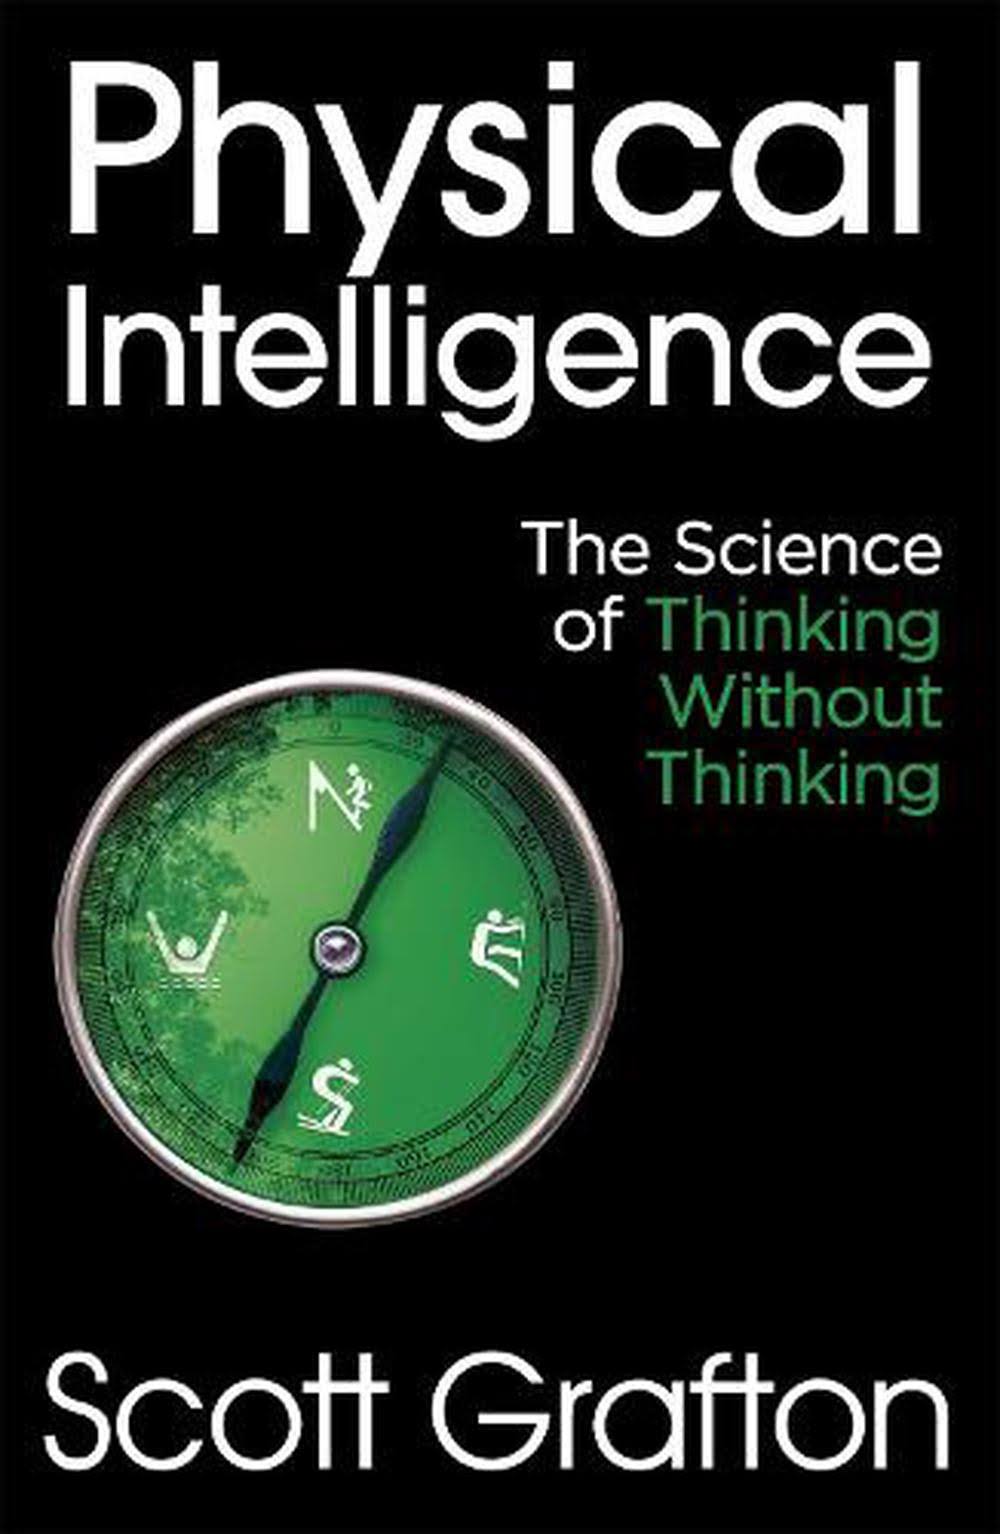 Physical Intelligence: The Science of Thinking Without Thinking [Book]